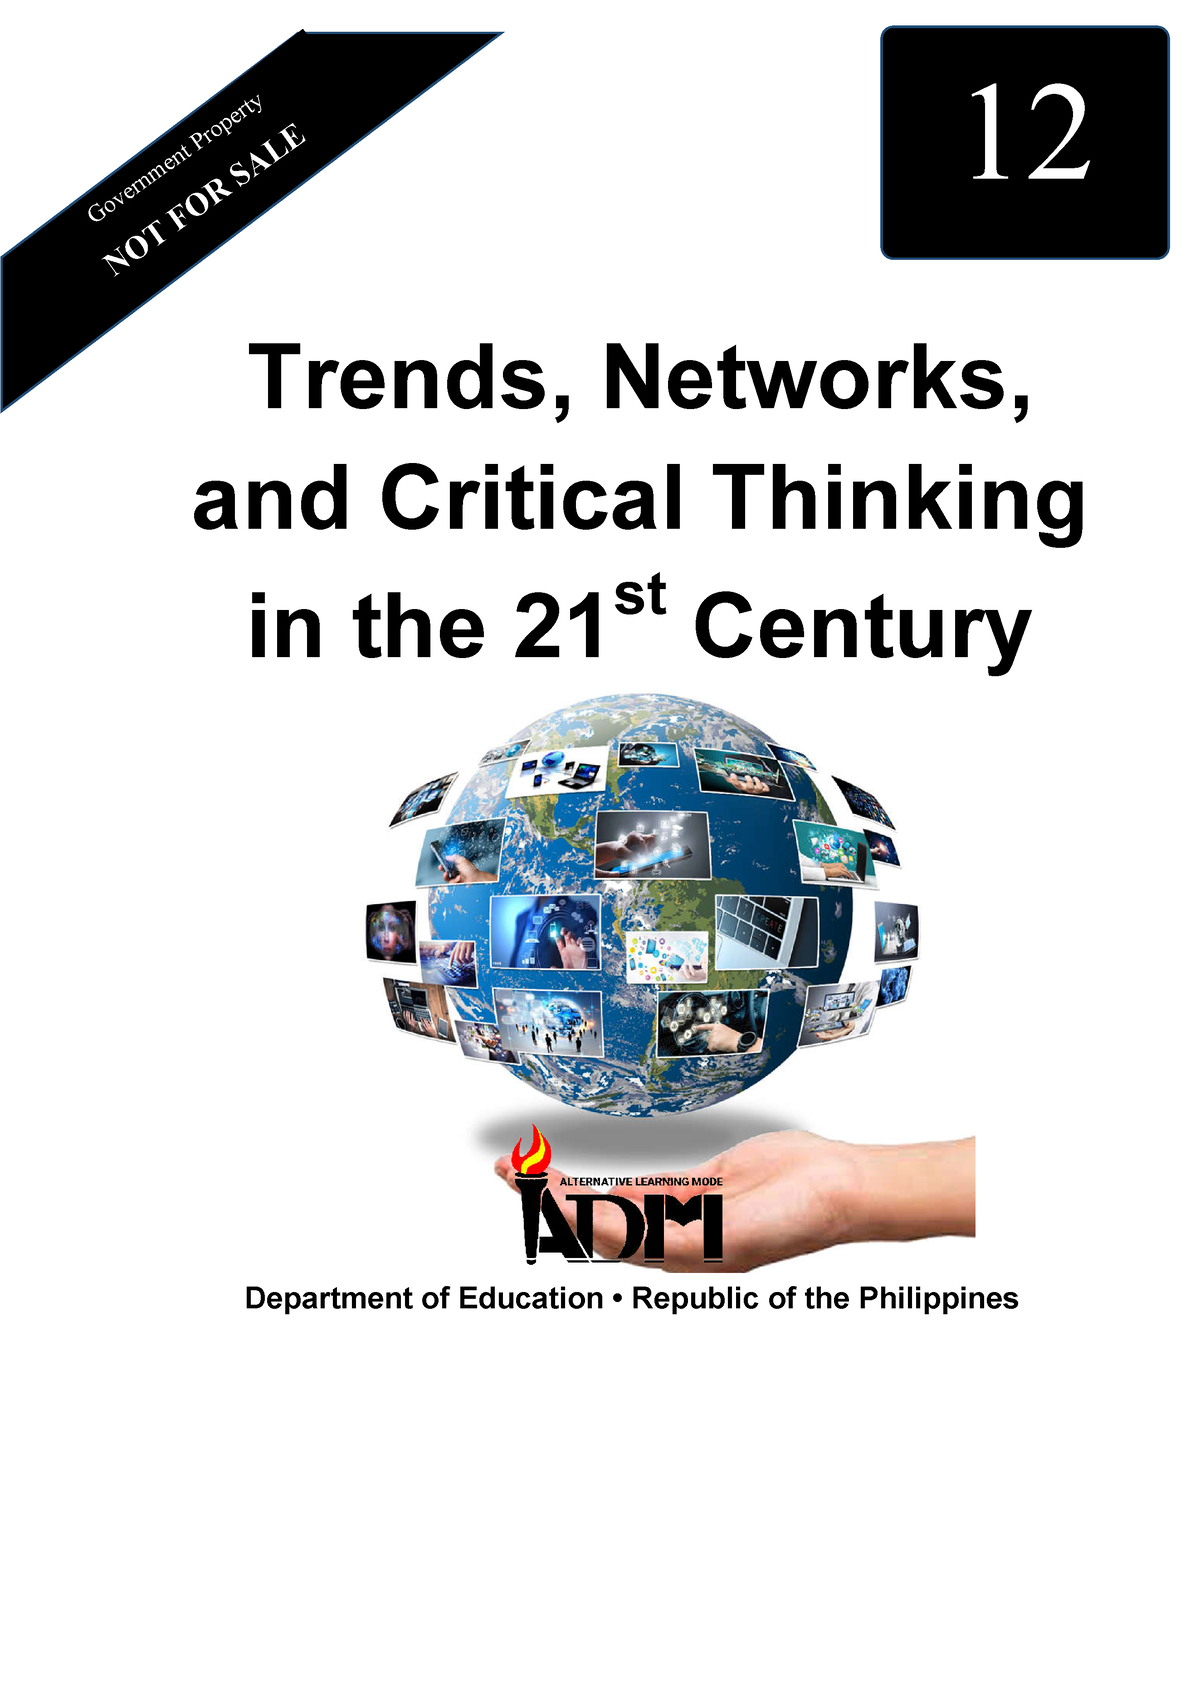 trends network and critical thinking in the 21st century slideshare